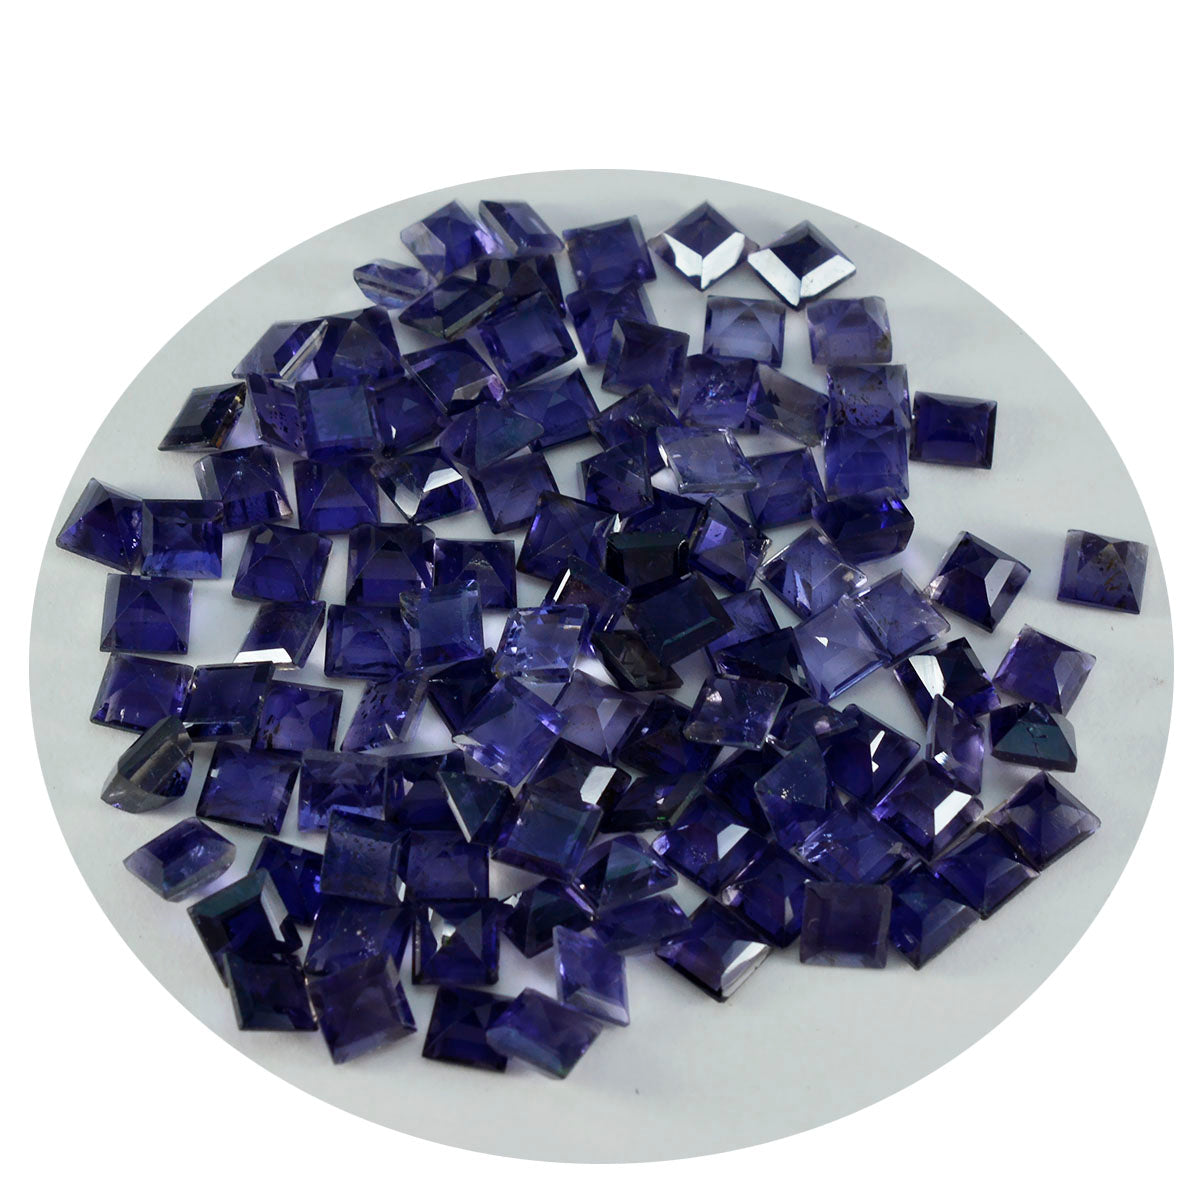 Riyogems 1PC Blue Iolite Faceted 6x6 mm Square Shape AAA Quality Stone